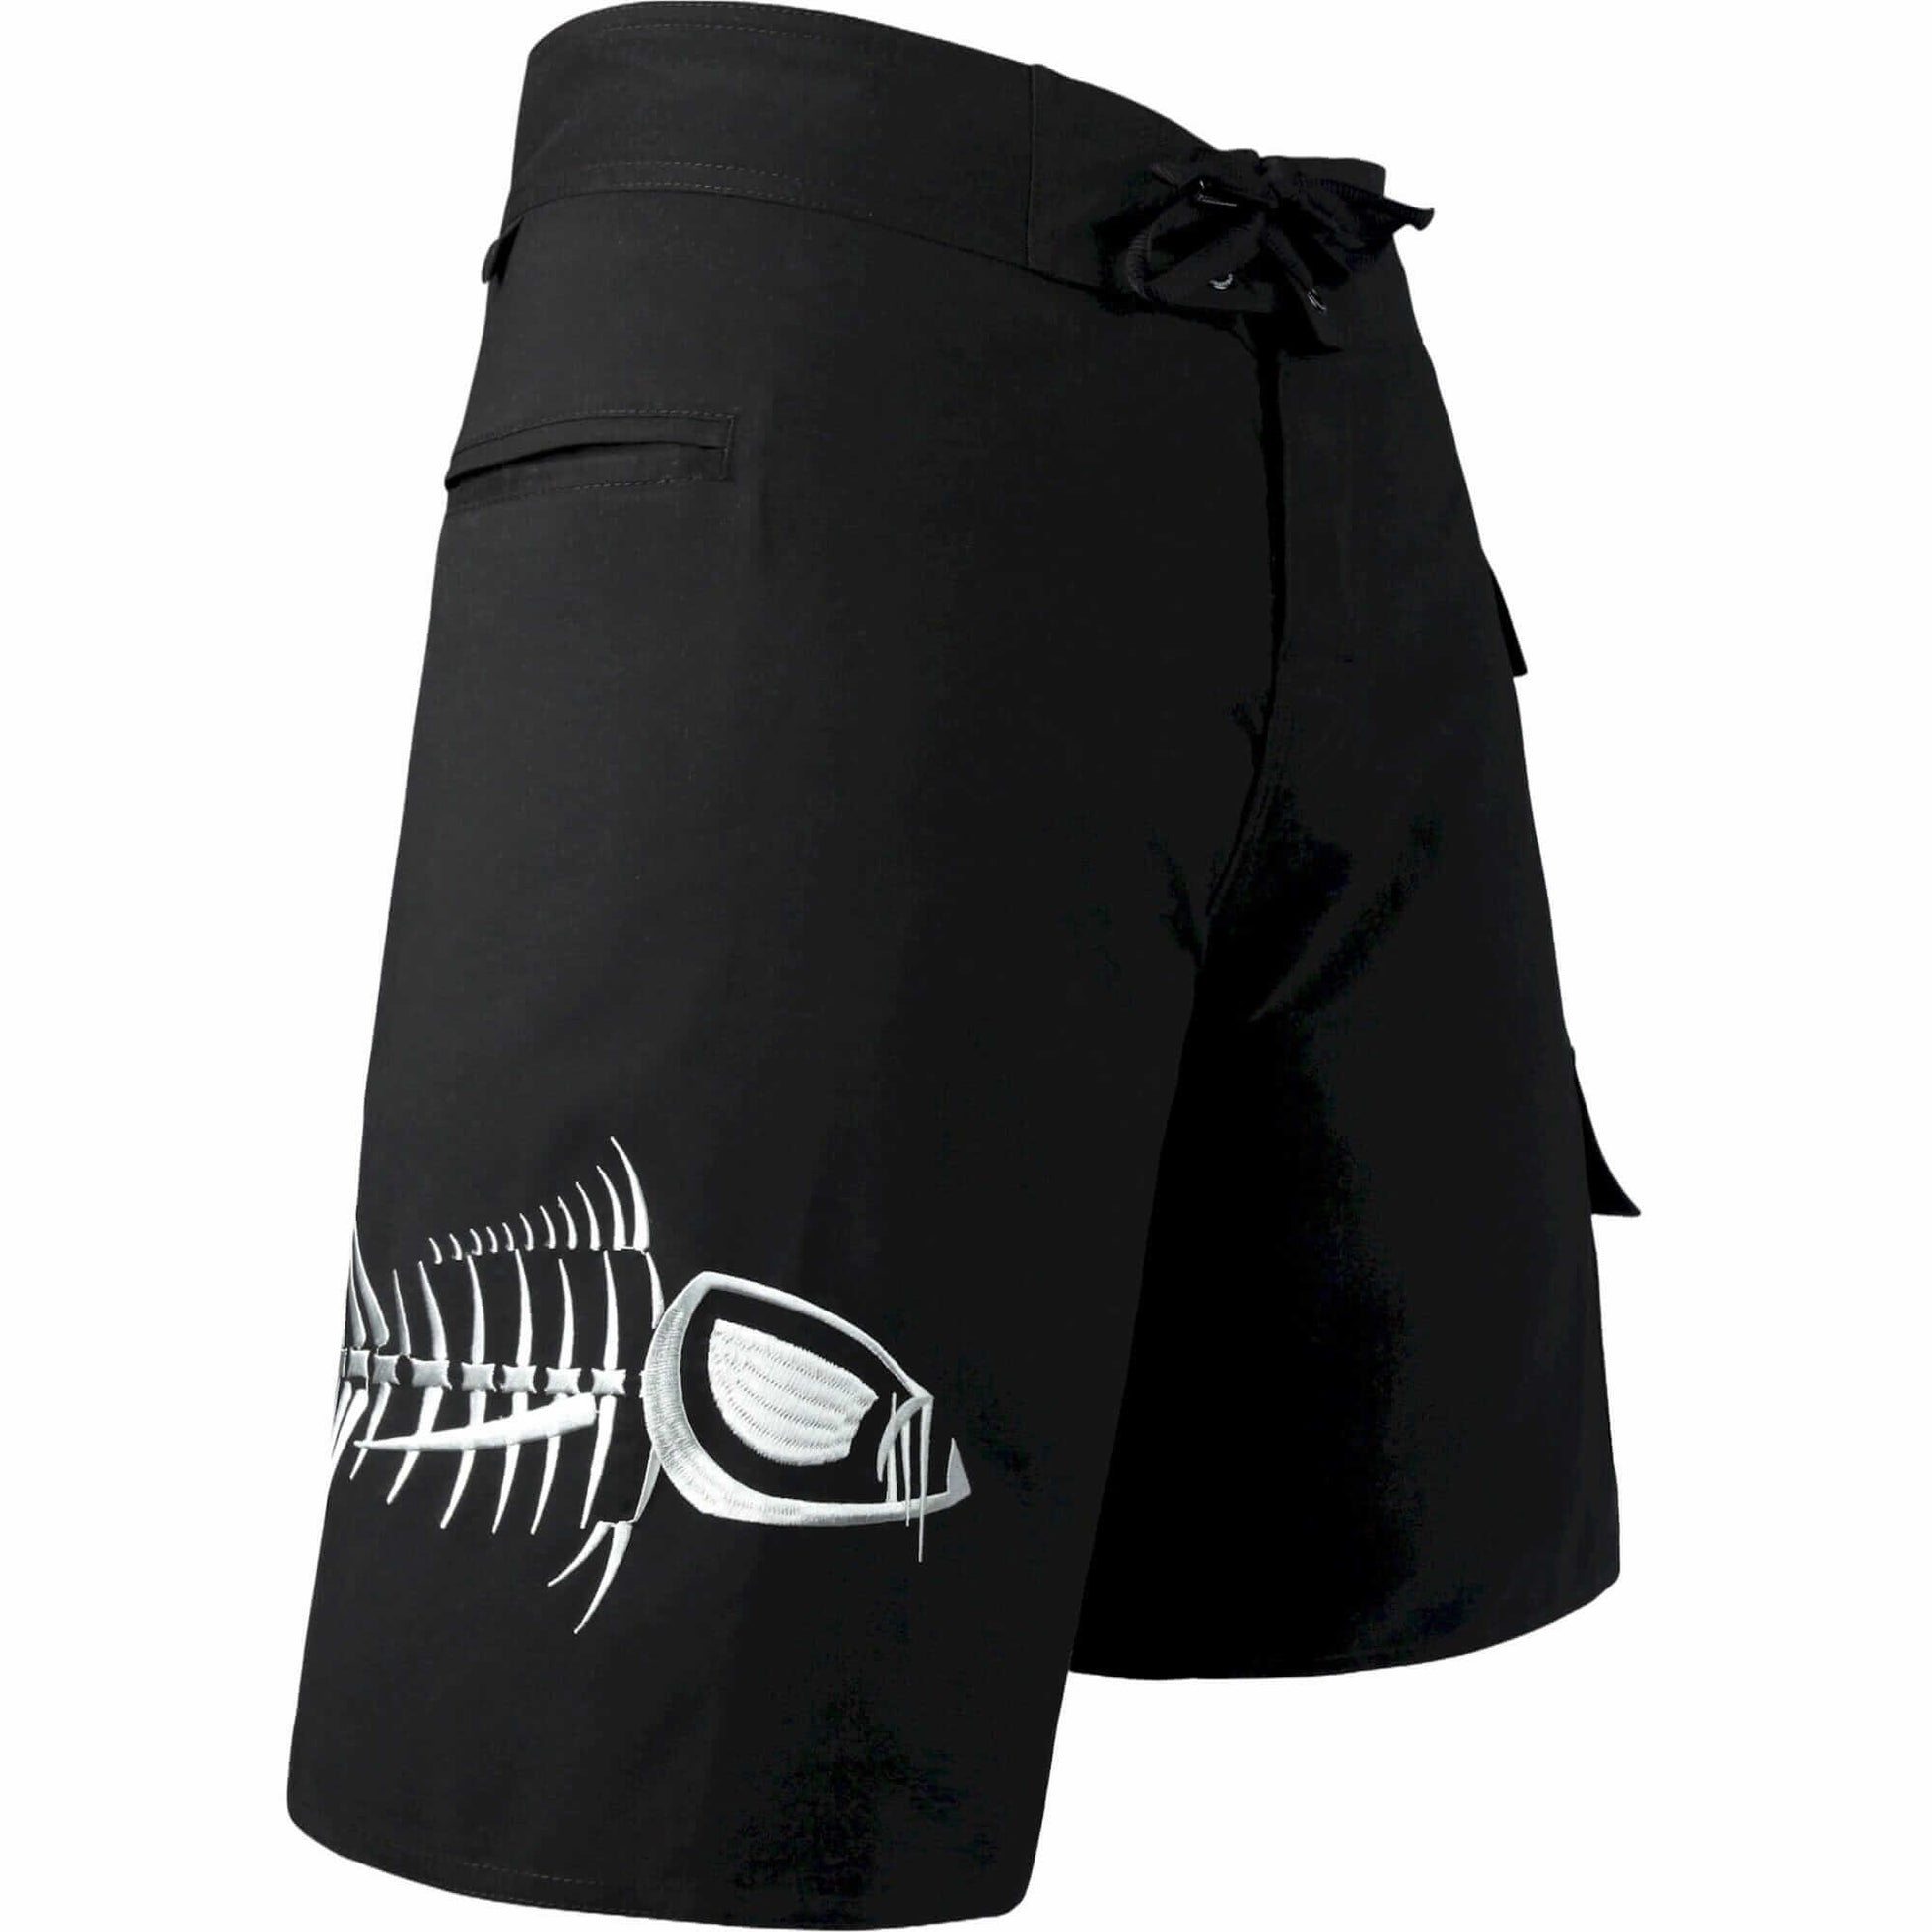 Black and White Waterman 5 Pocket Board Shorts Waterman 5 Pocket Performance Fishing Board Shorts Tormenter Ocean Black and White 28 